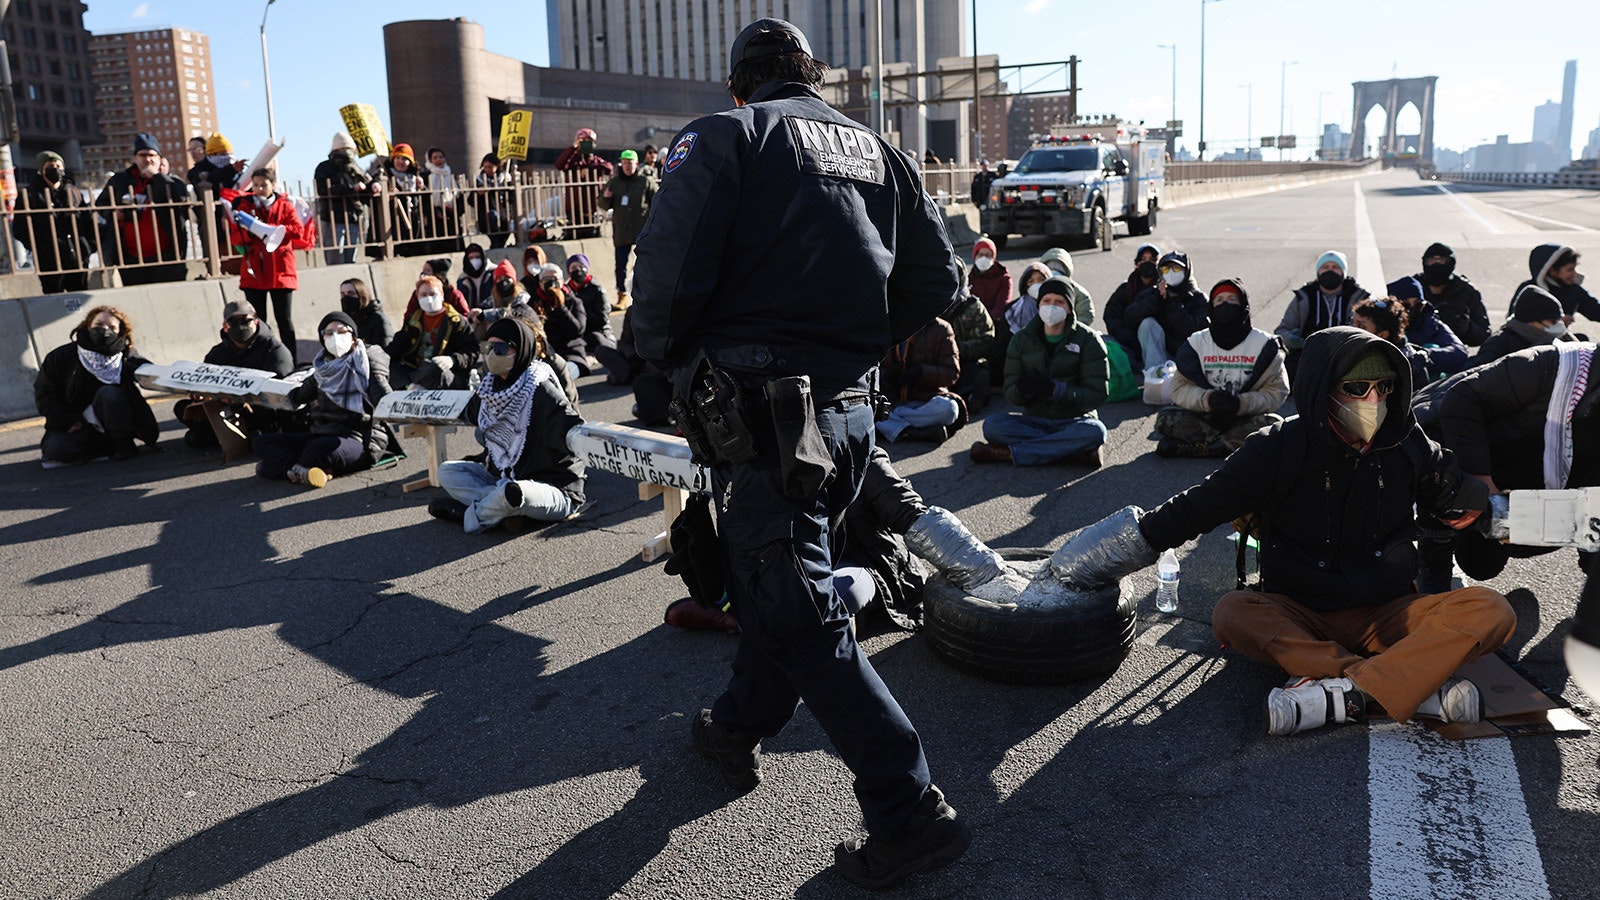 Pro-Palestinian demonstrators close down the Brooklyn Bridge, one of the main bridges connecting Manhattan to Brooklyn, on Monday morning in New York City.